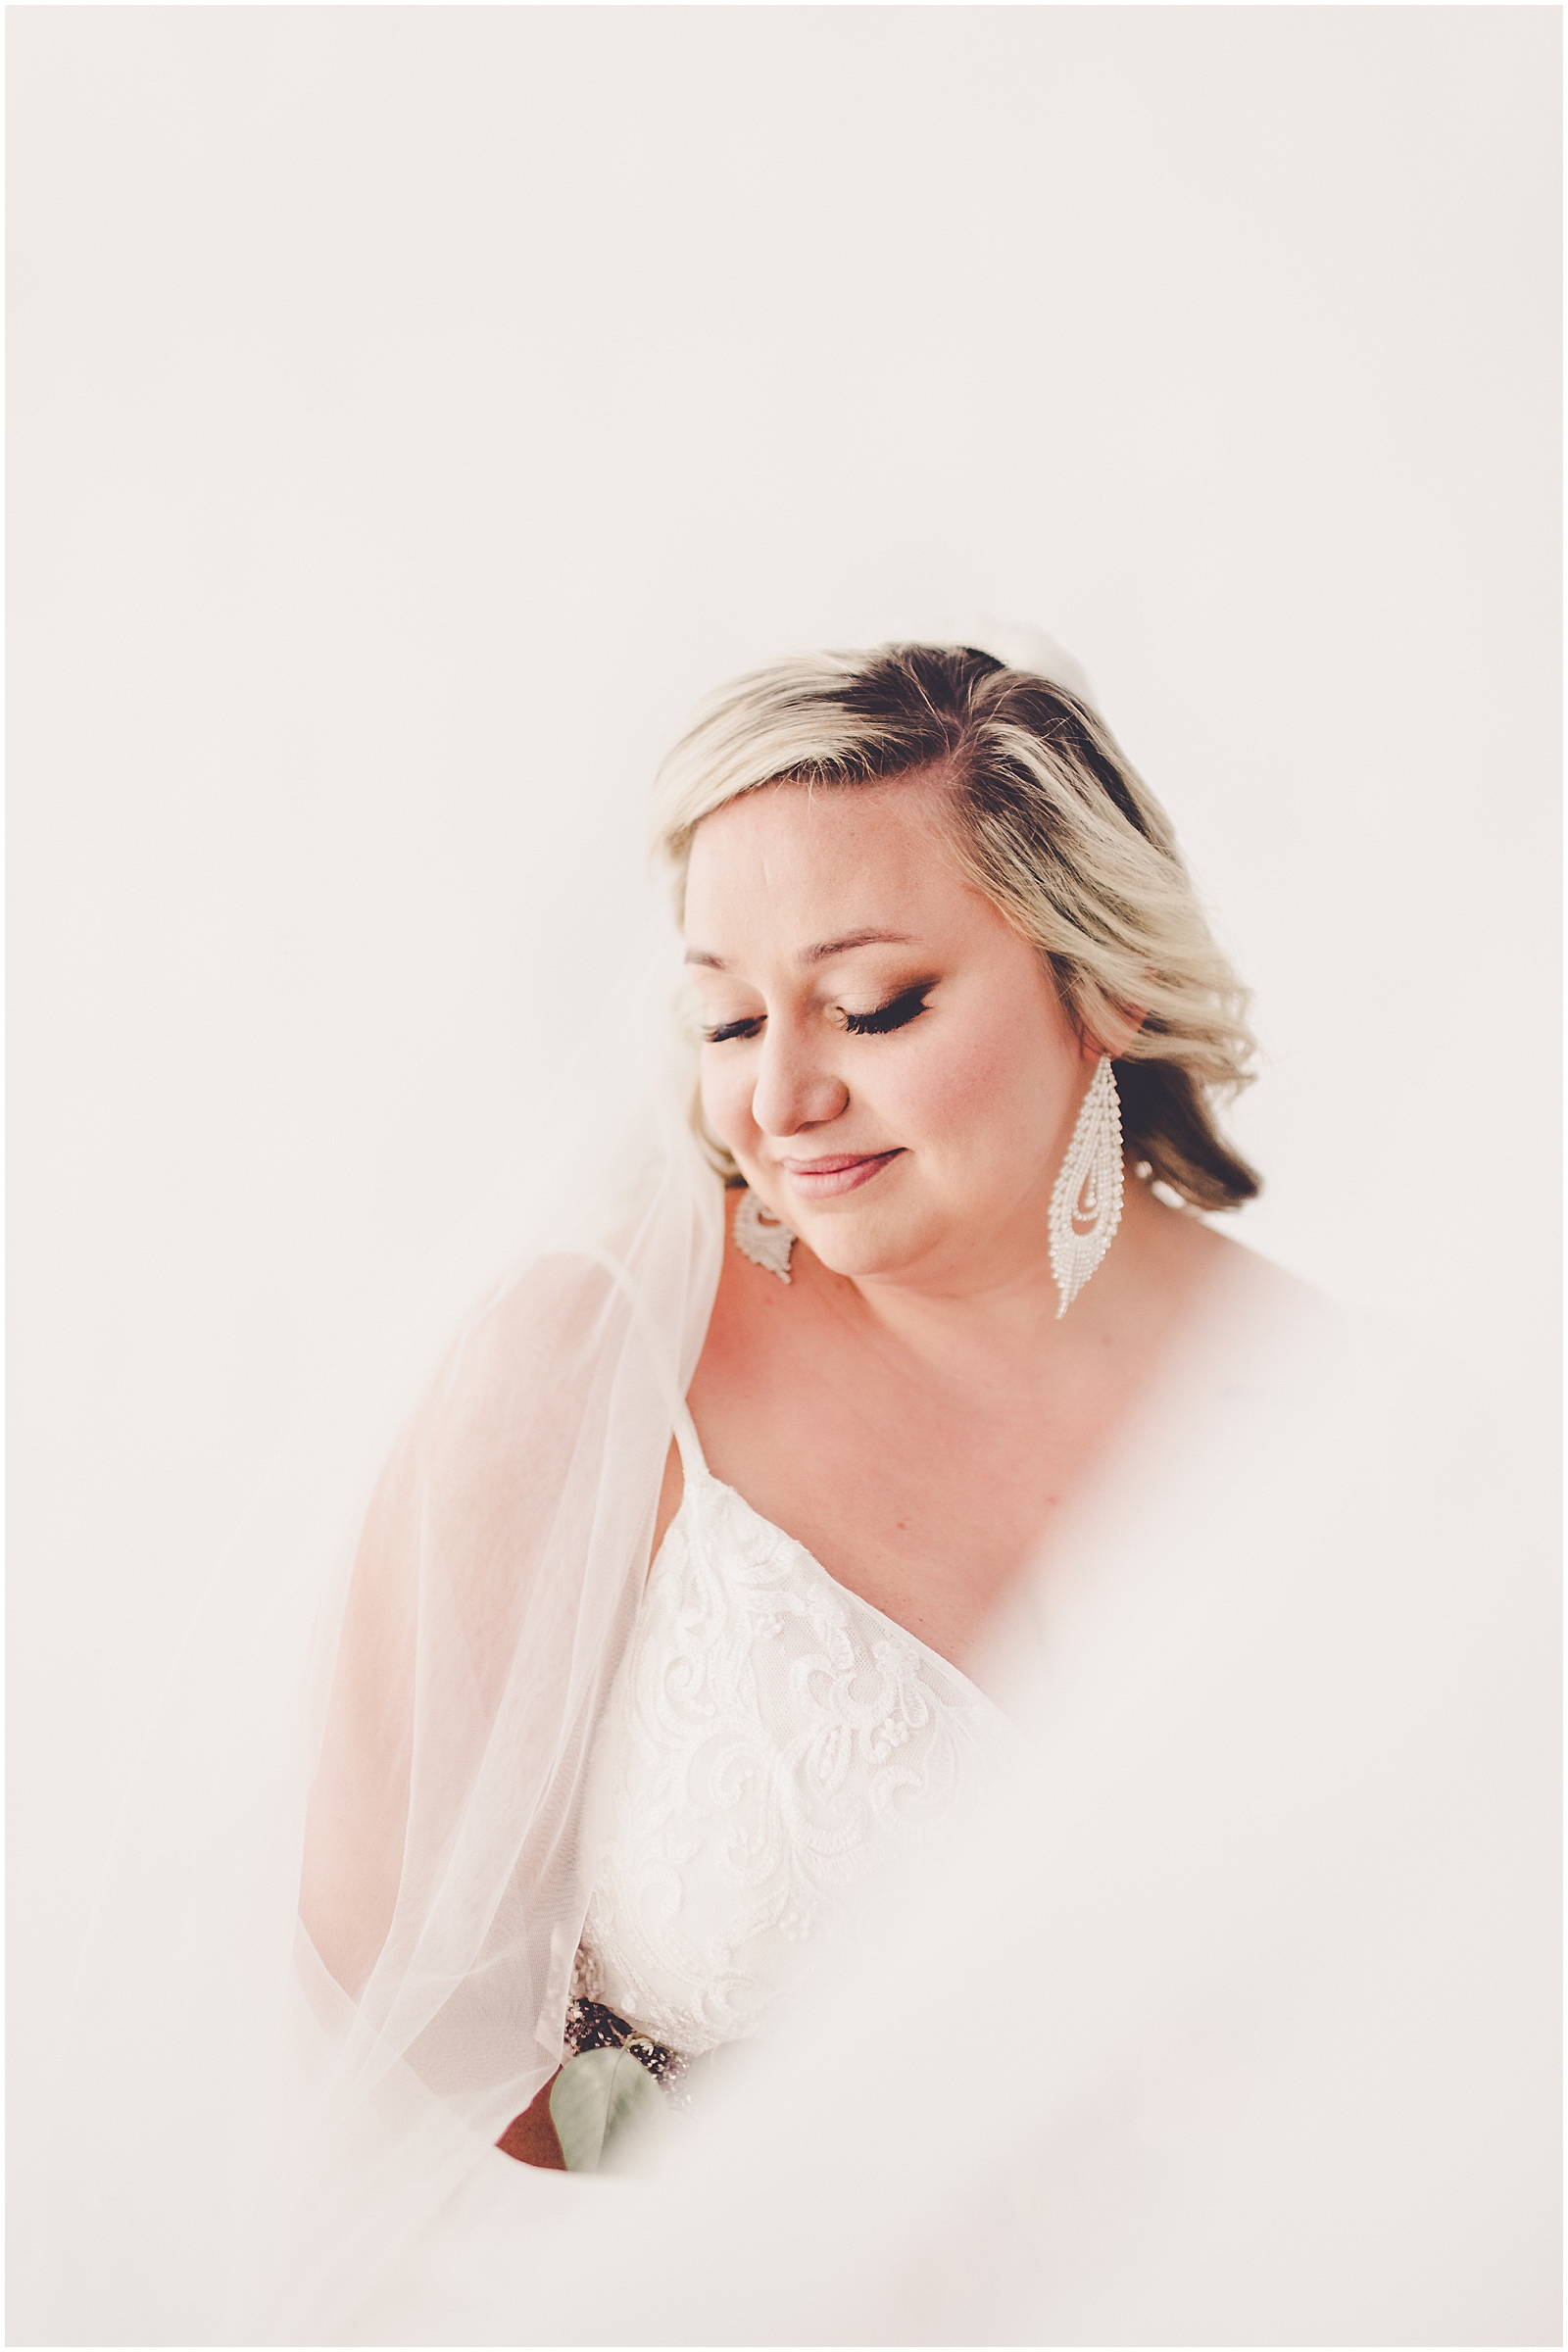 Amy's studio bridal session at natural light photography studio - Studio 388 - in downtown Kankakee, Illinois.